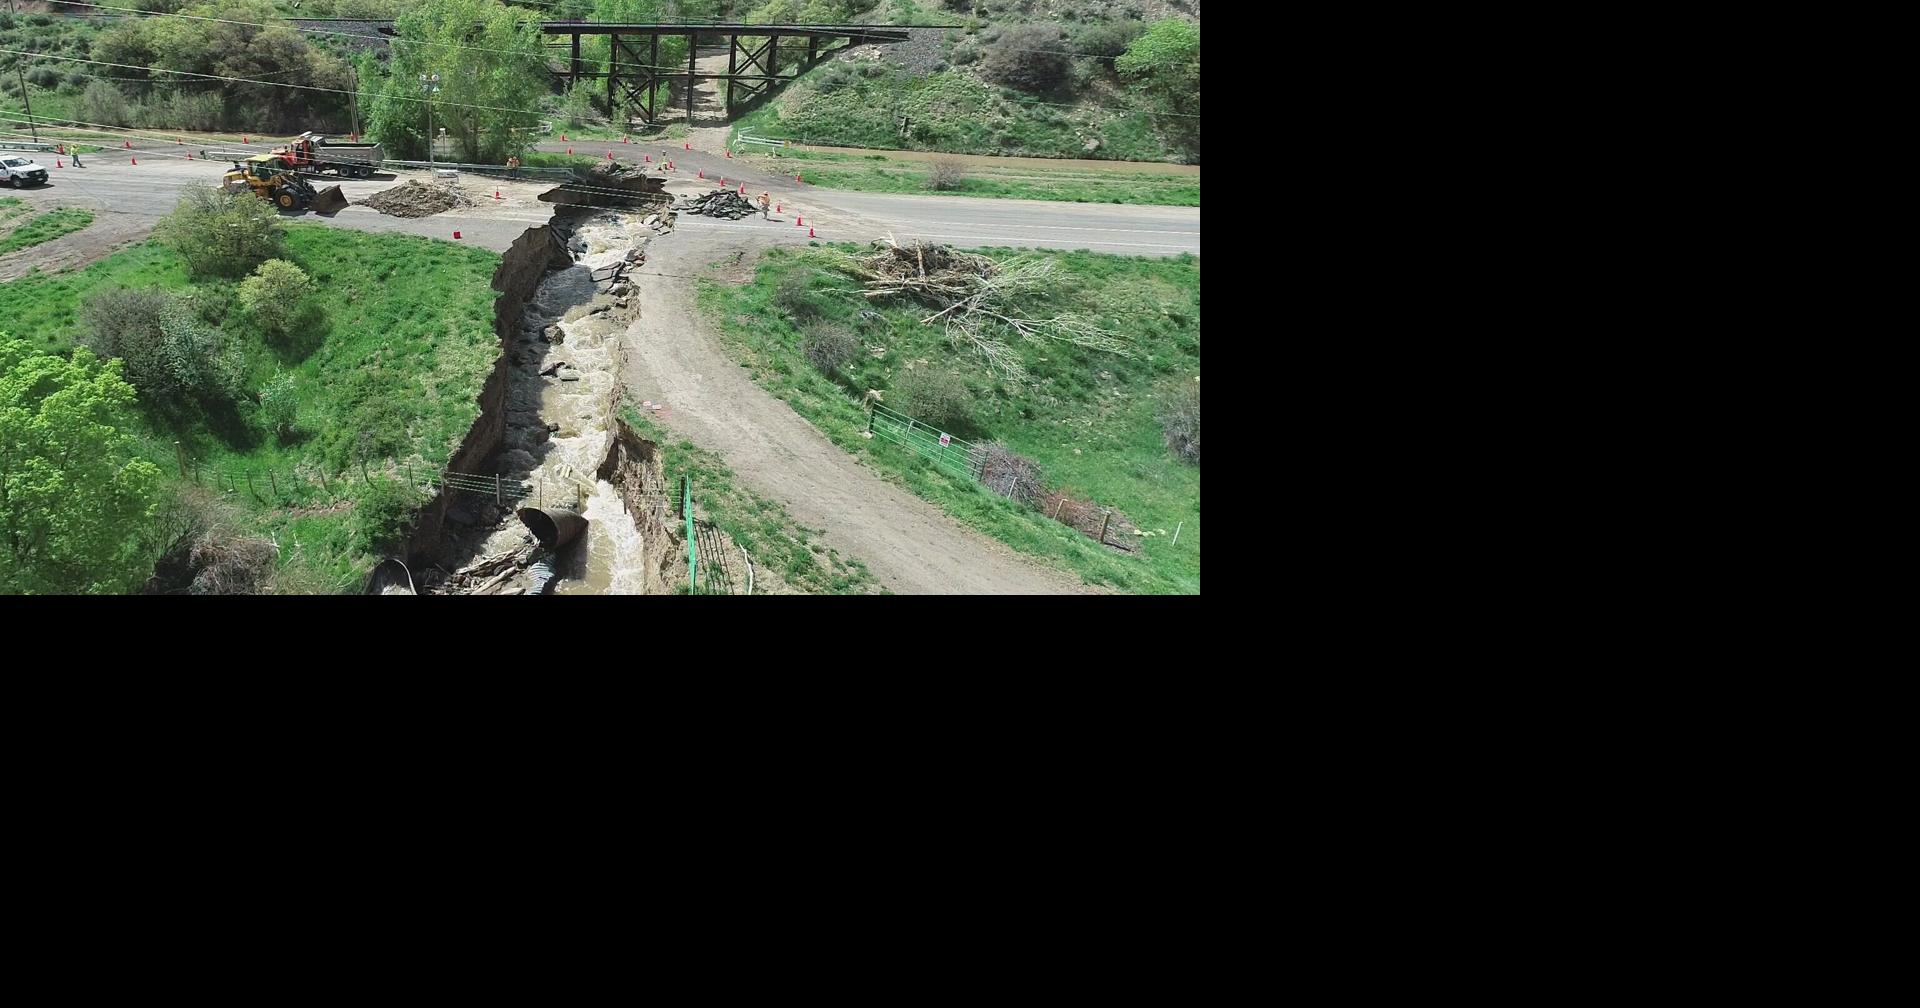 CDOT offering free commuter shuttle for CO 133 sinkhole closure